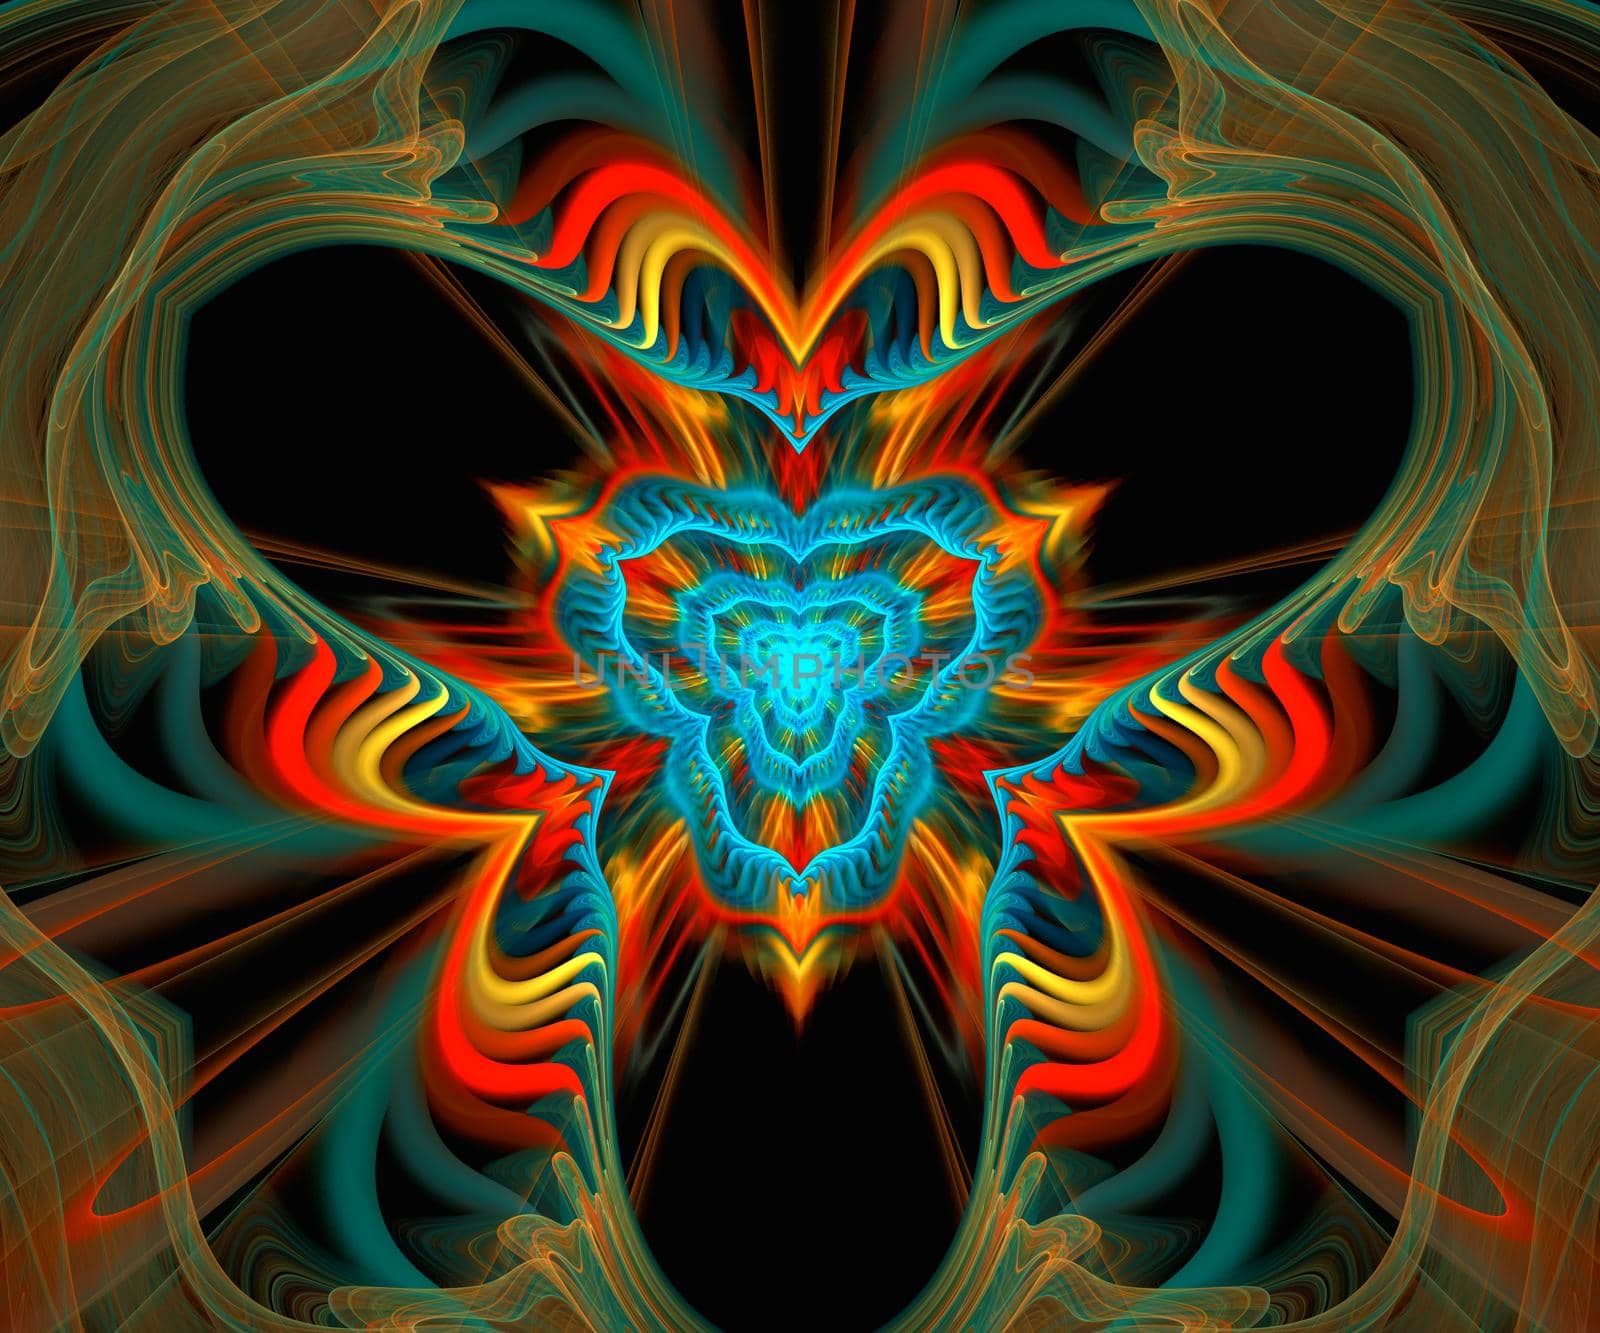 Computer generated colorful fractal artwork by stocklady